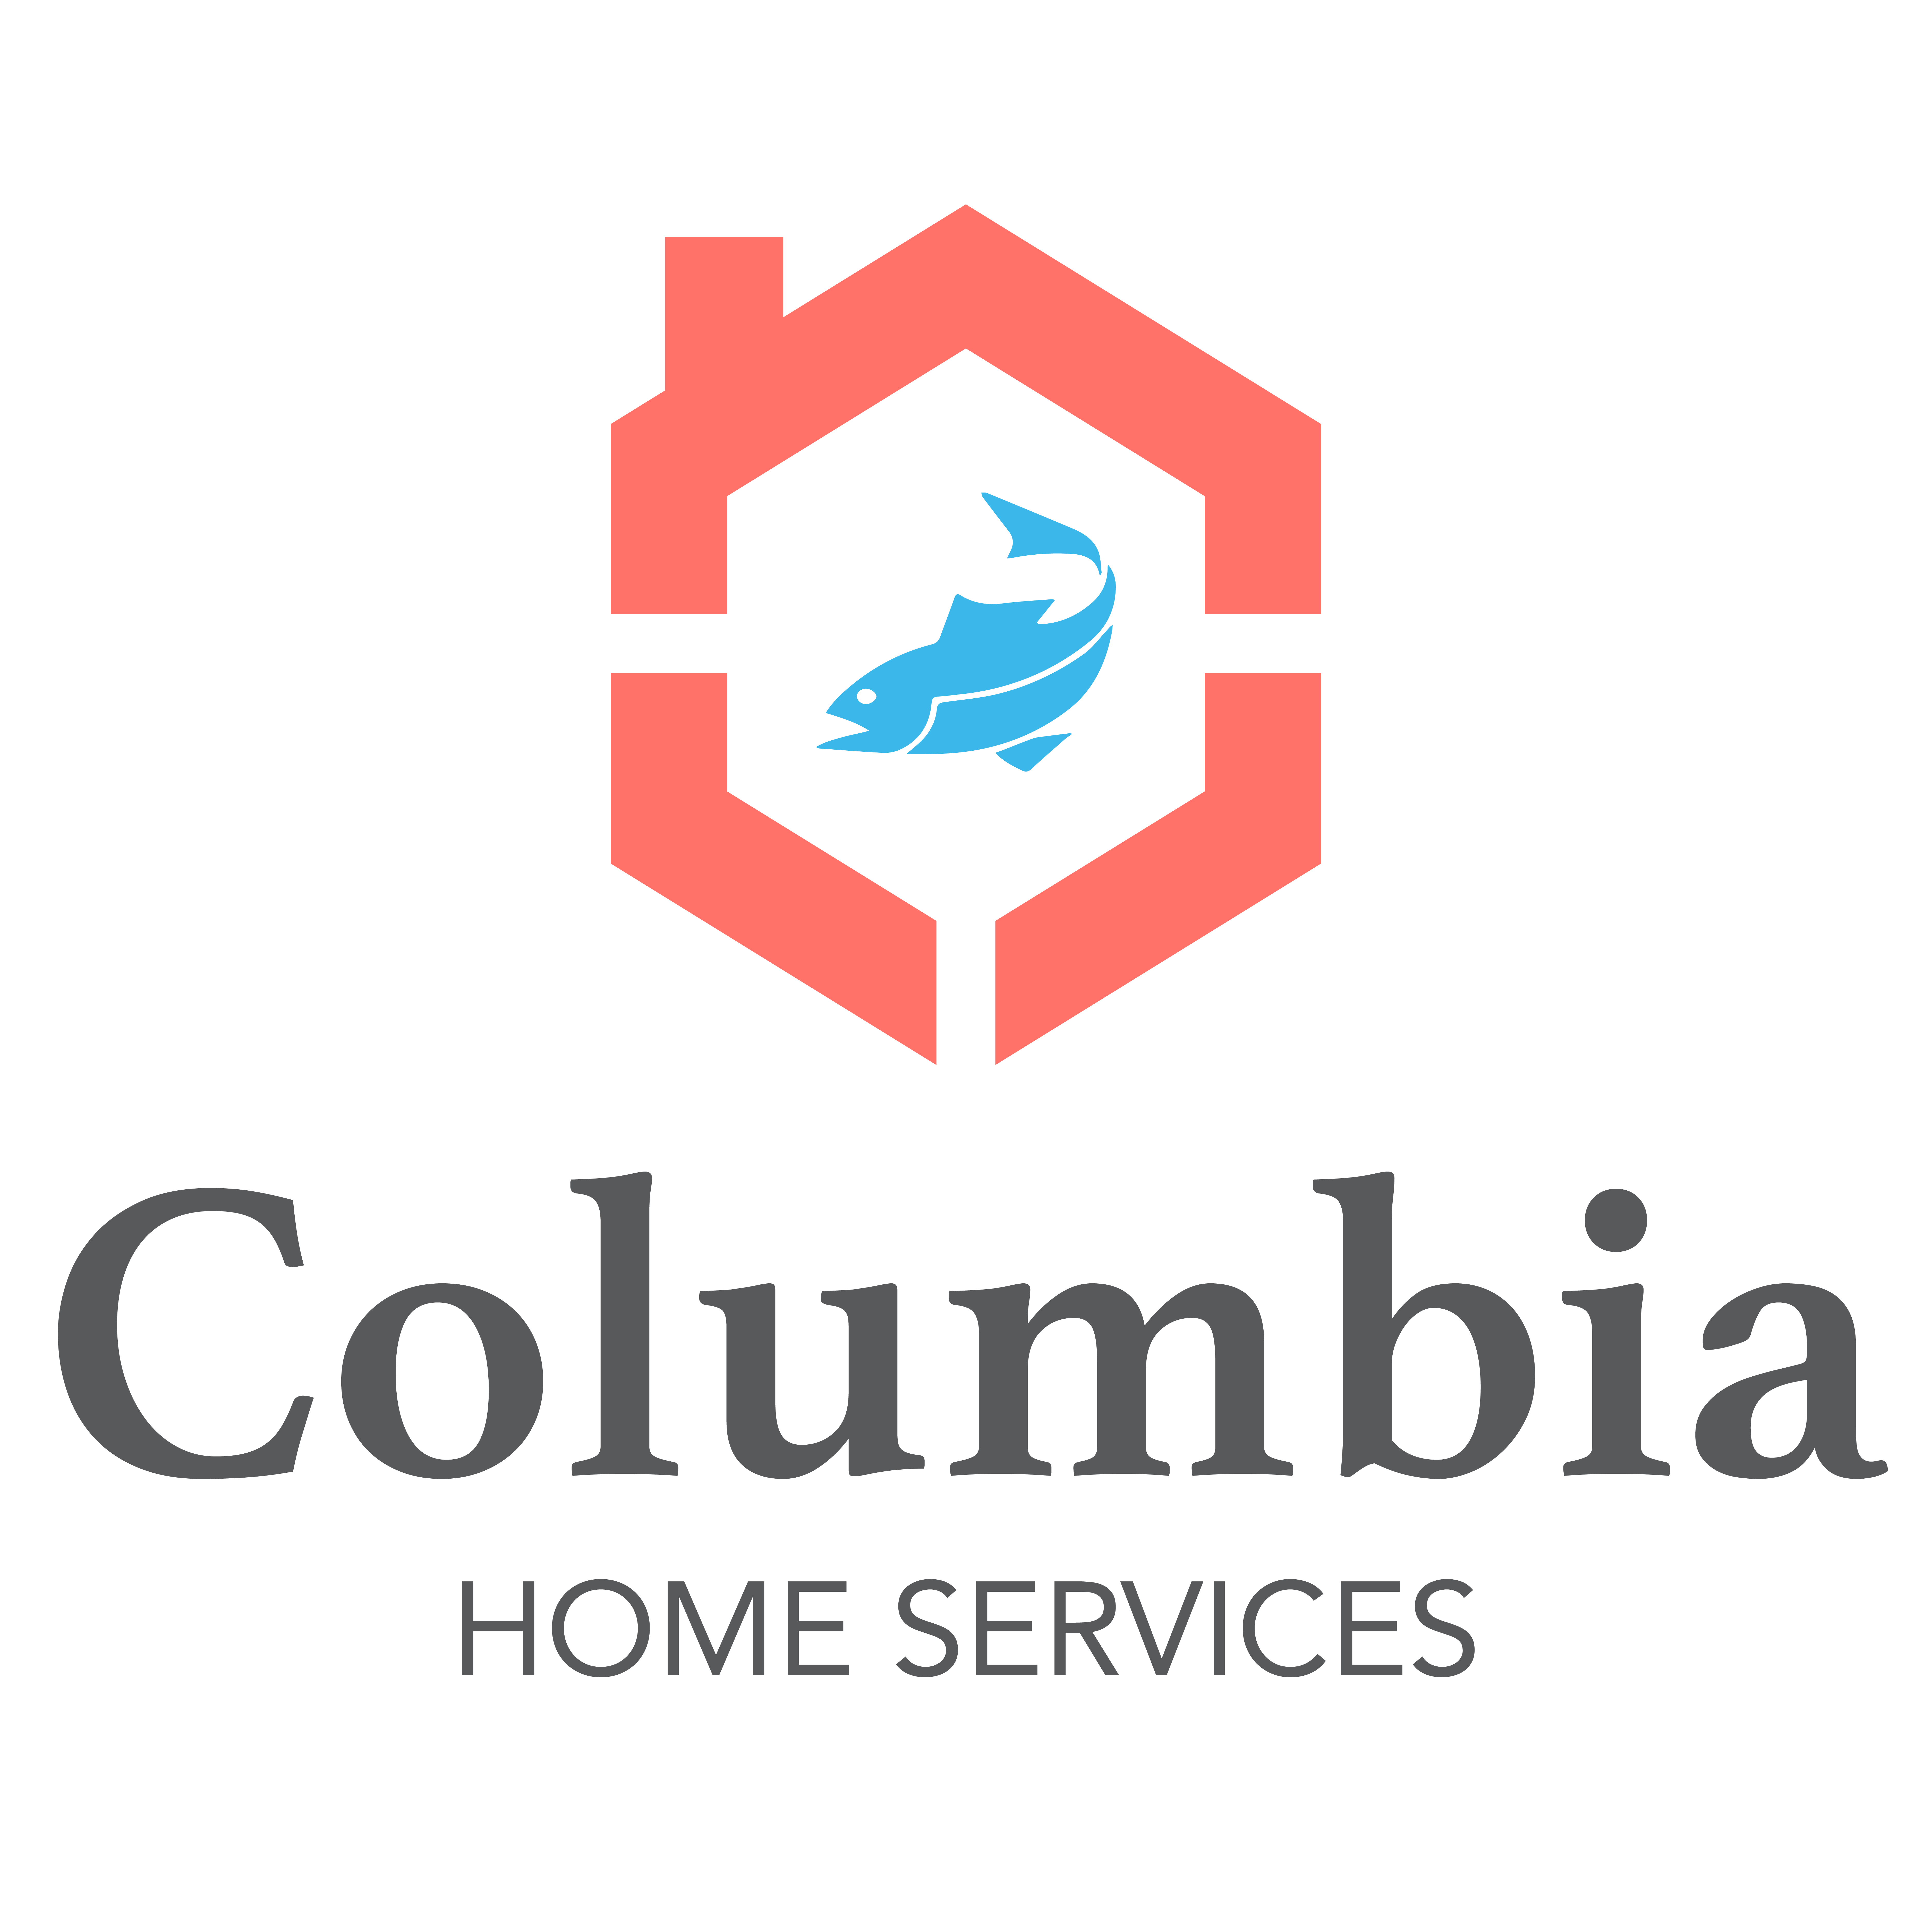 Columbia Home Services (CHS)